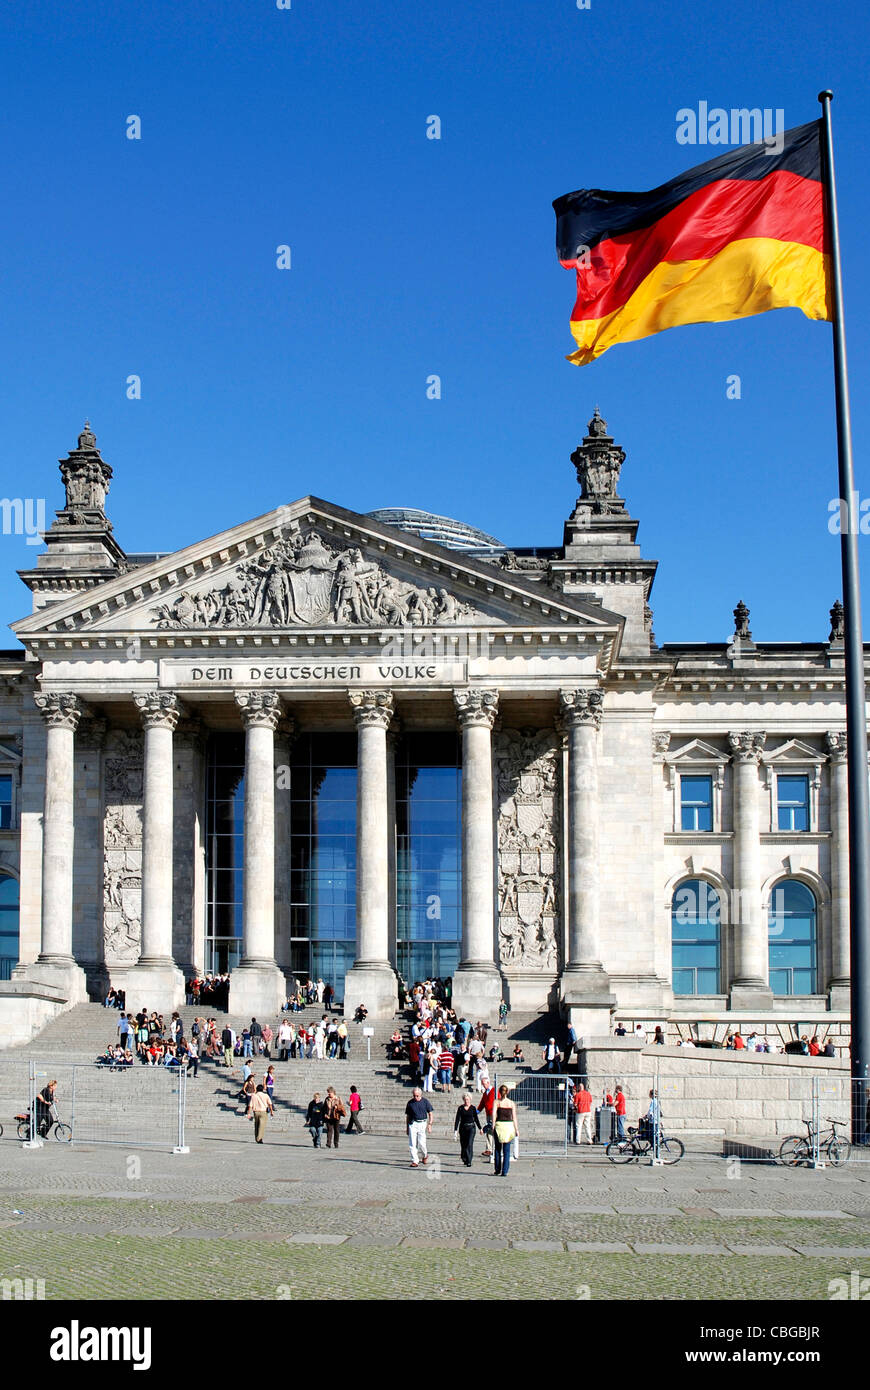 German Reichstag building in Berlin - Seat of the German Federal Parliament Bundestag. Stock Photo